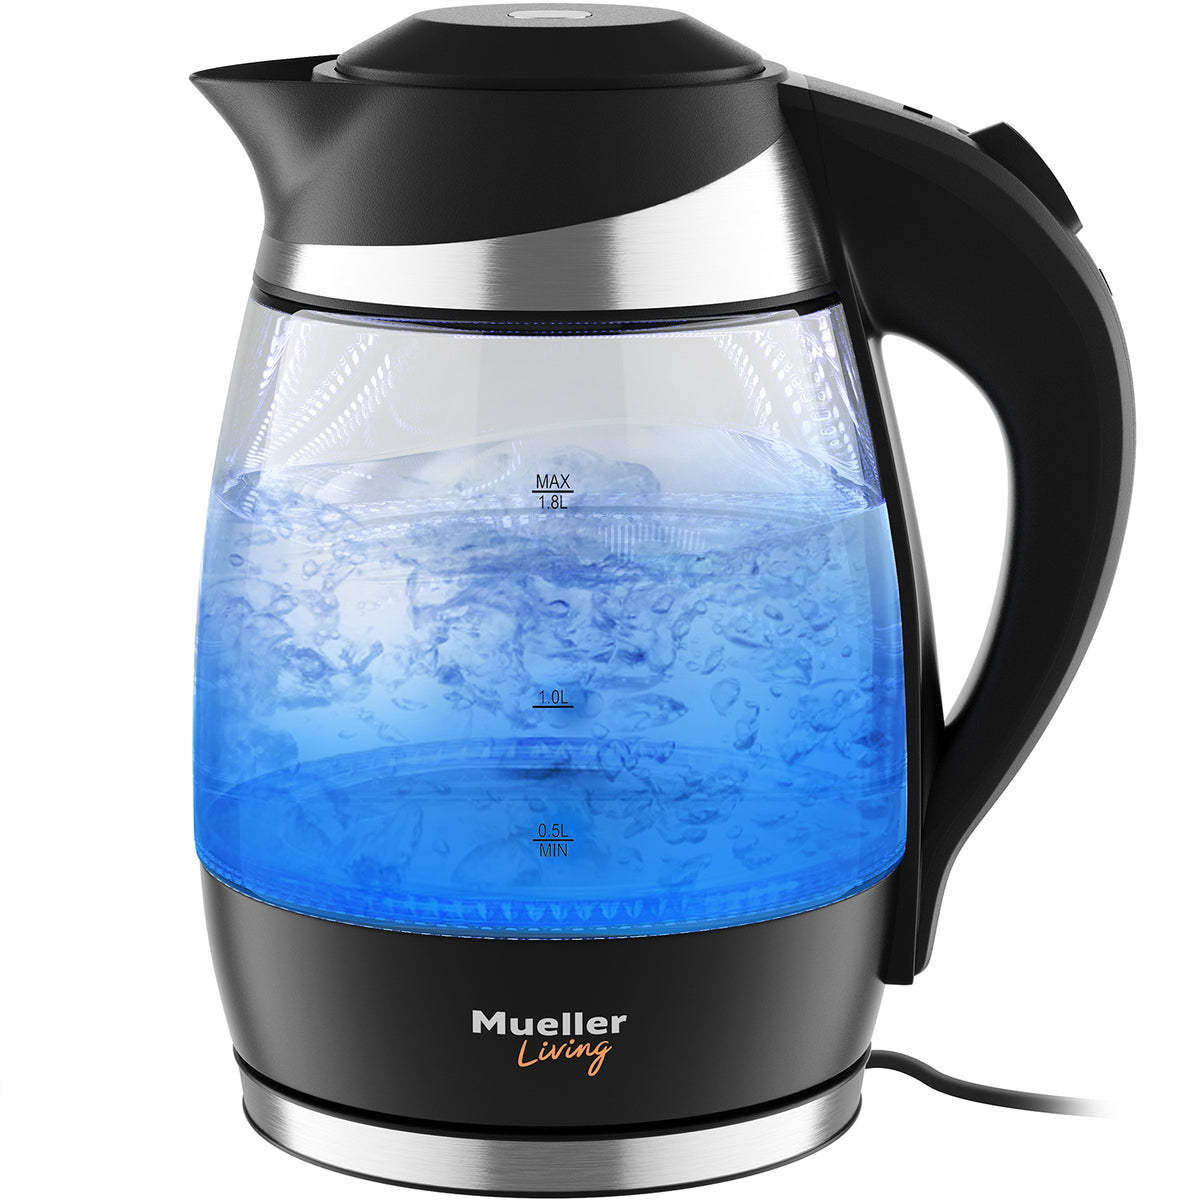 How to Use Mueller Ultra Electric Kettle? 